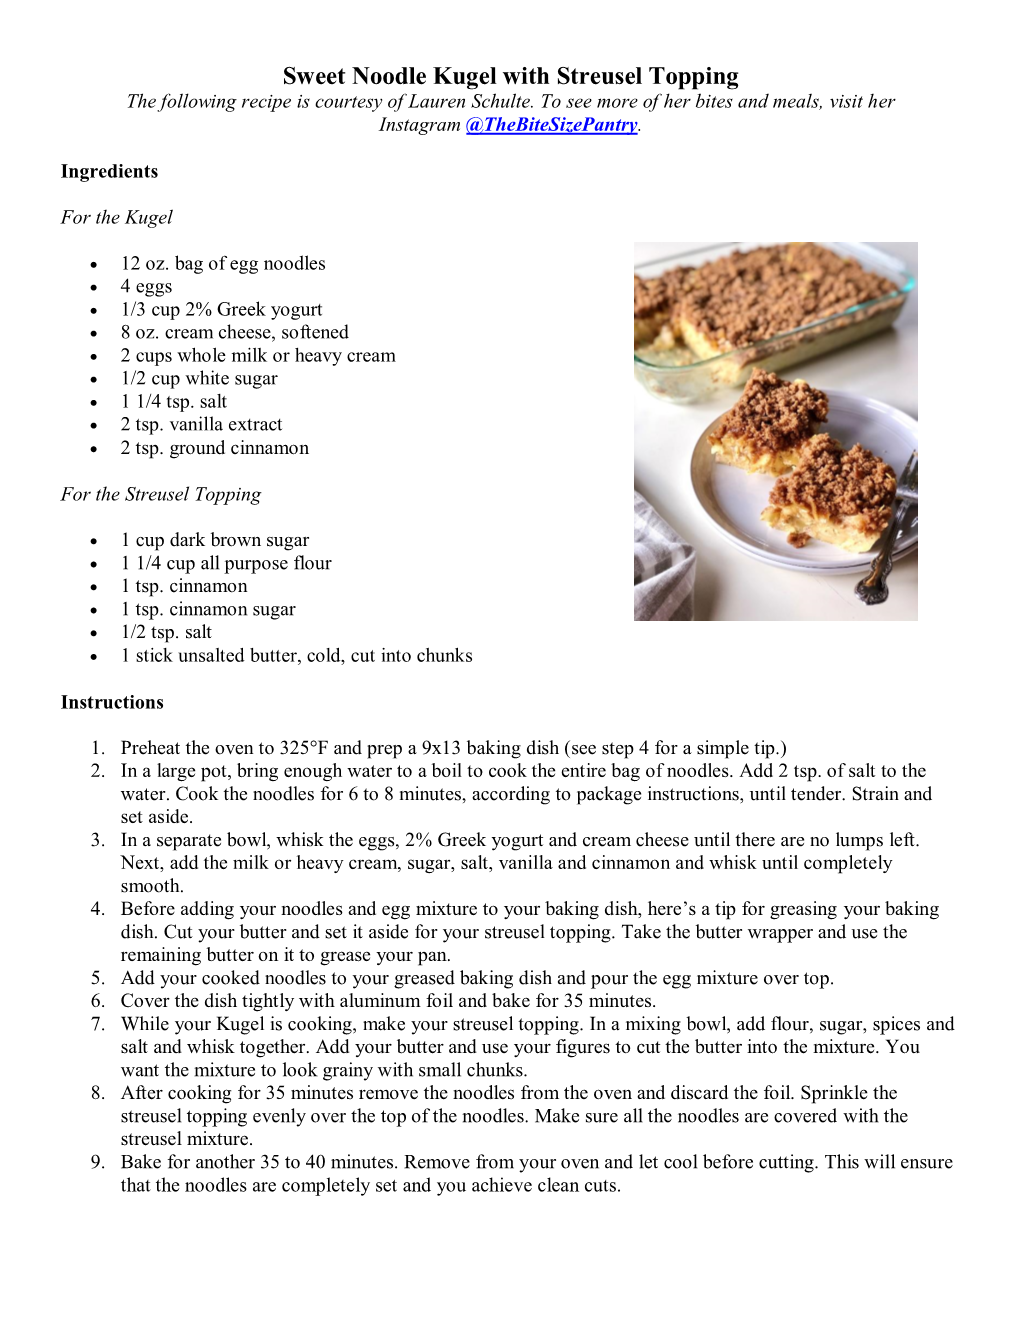 Sweet Noodle Kugel with Streusel Topping the Following Recipe Is Courtesy of Lauren Schulte